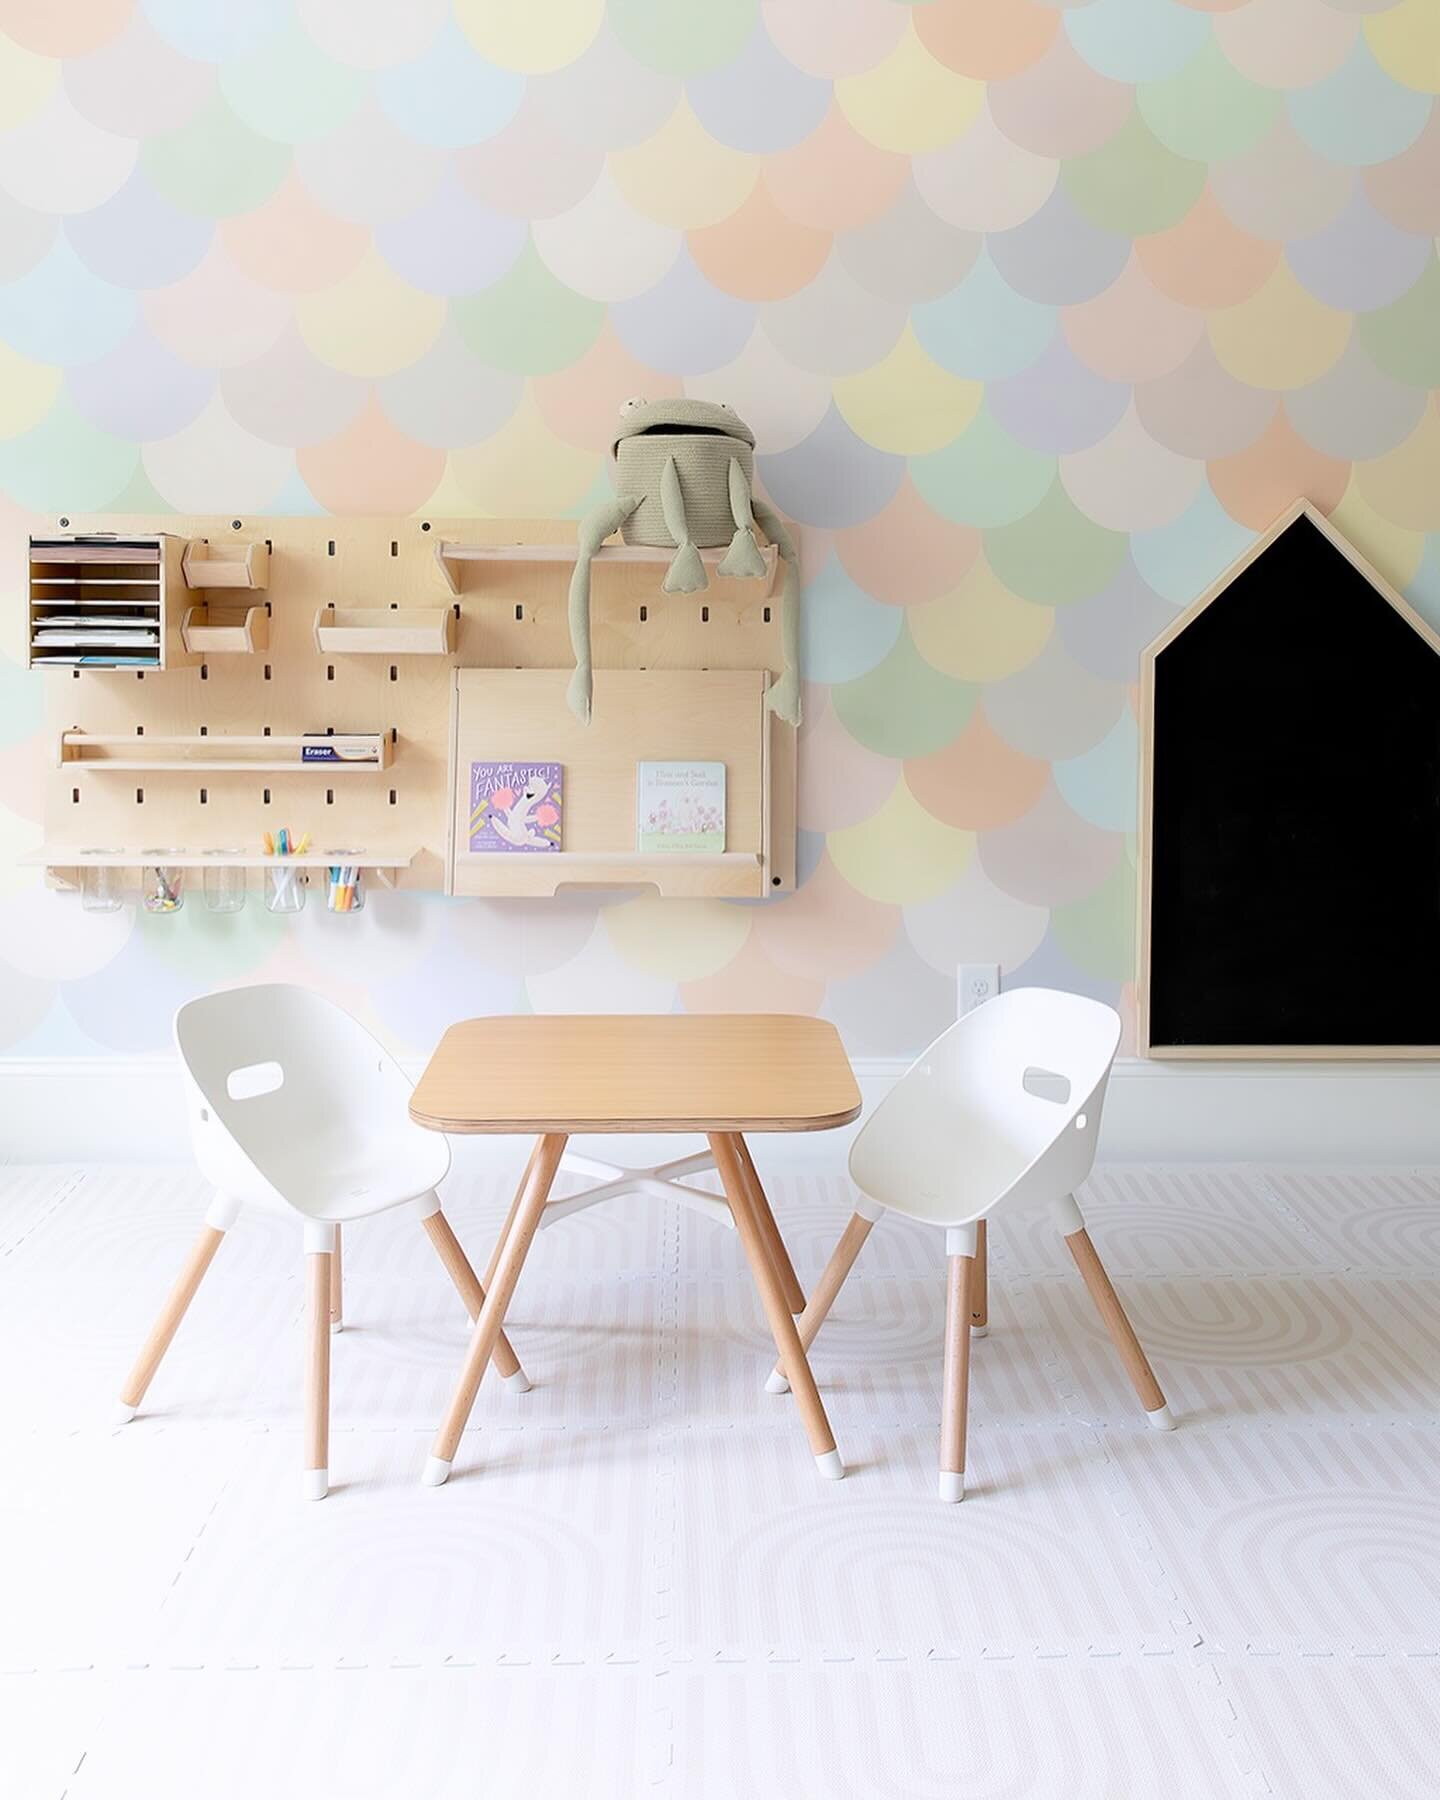 Step into our playful haven for a little girl with a love for colors. From the pastel wallpaper to carefully selected furniture, every detail is a nod to creativity and independence. Safety was our priority, with non-toxic materials creating an inspi